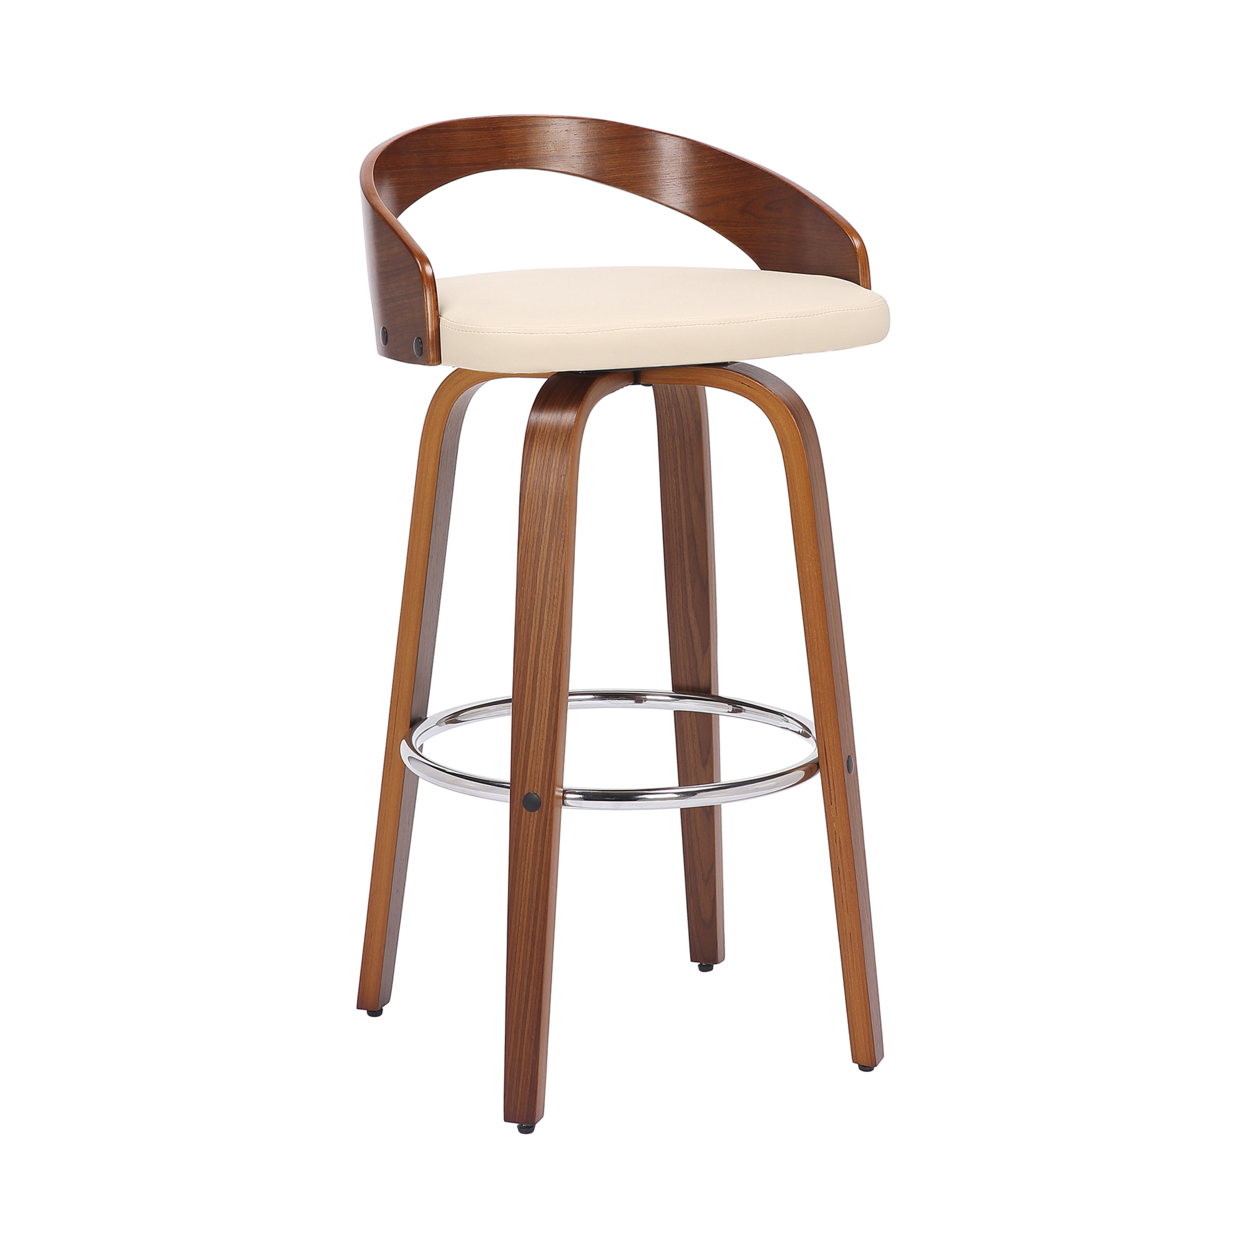 Bar Stool With Curved Open Back And Swivel Mechanism, Brown- Saltoro Sherpi